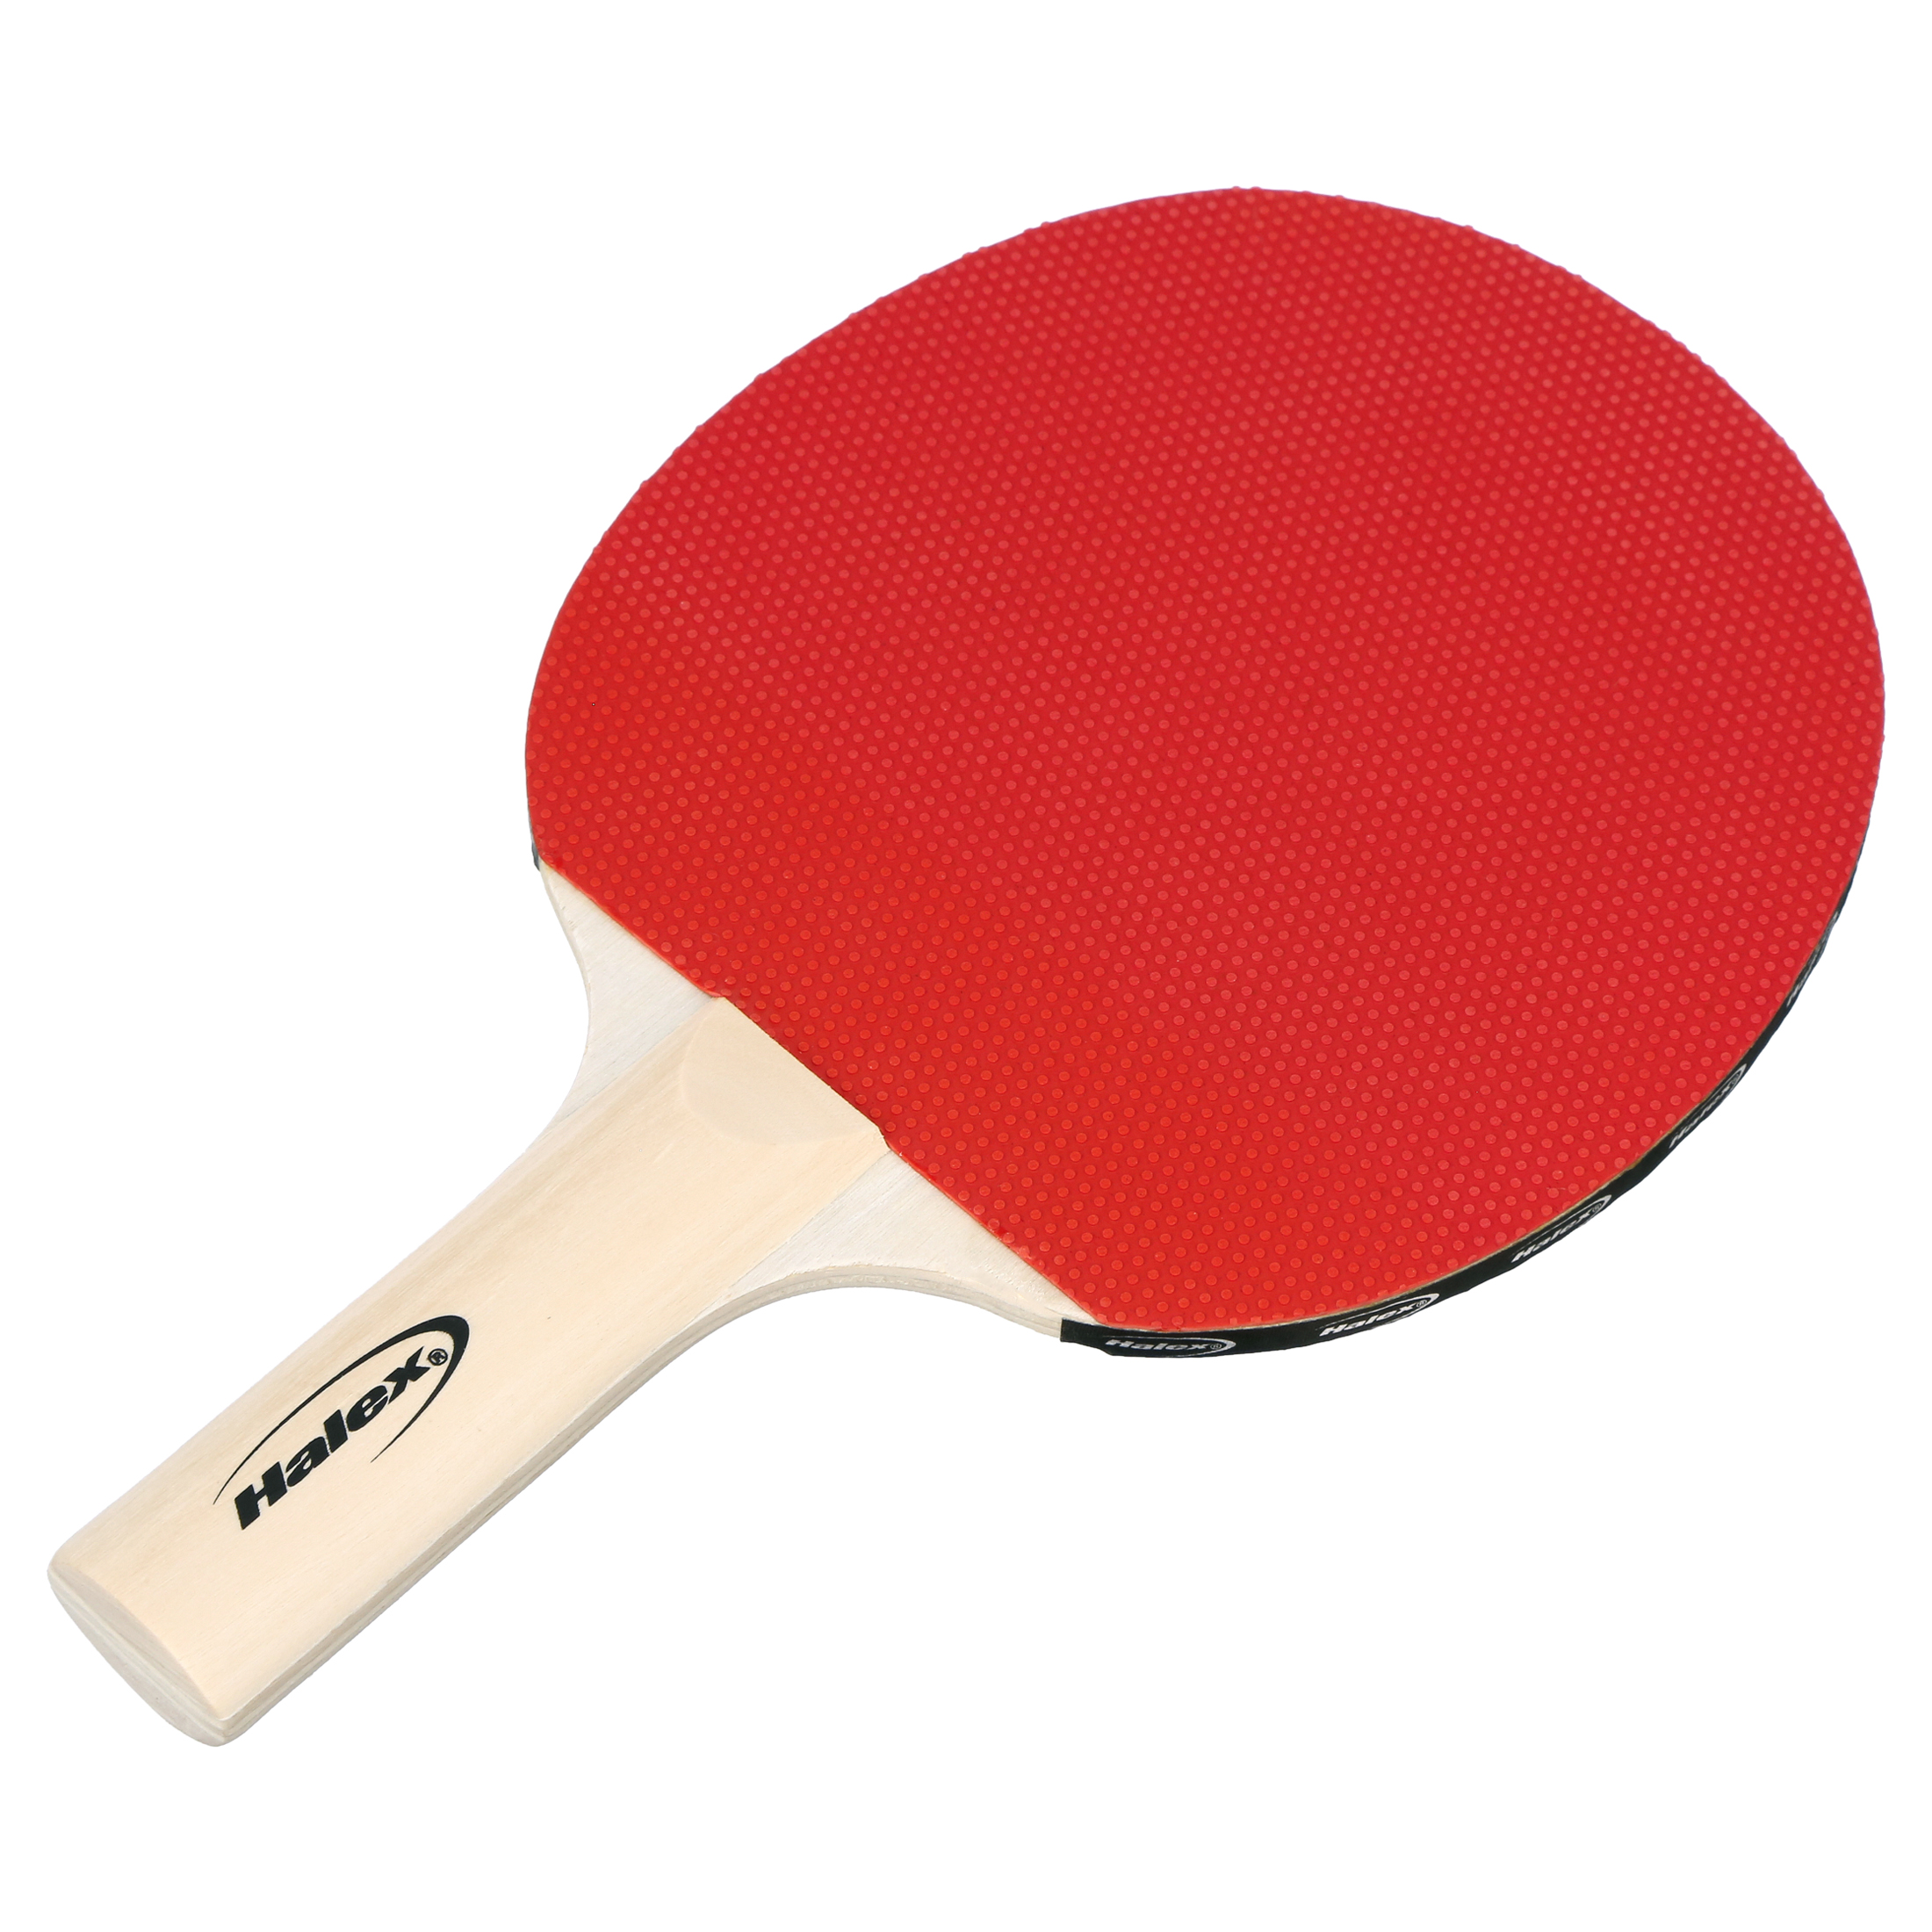 Halex Velocity Table Tennis Paddle, One Paddle, Wooden Handle - image 1 of 6